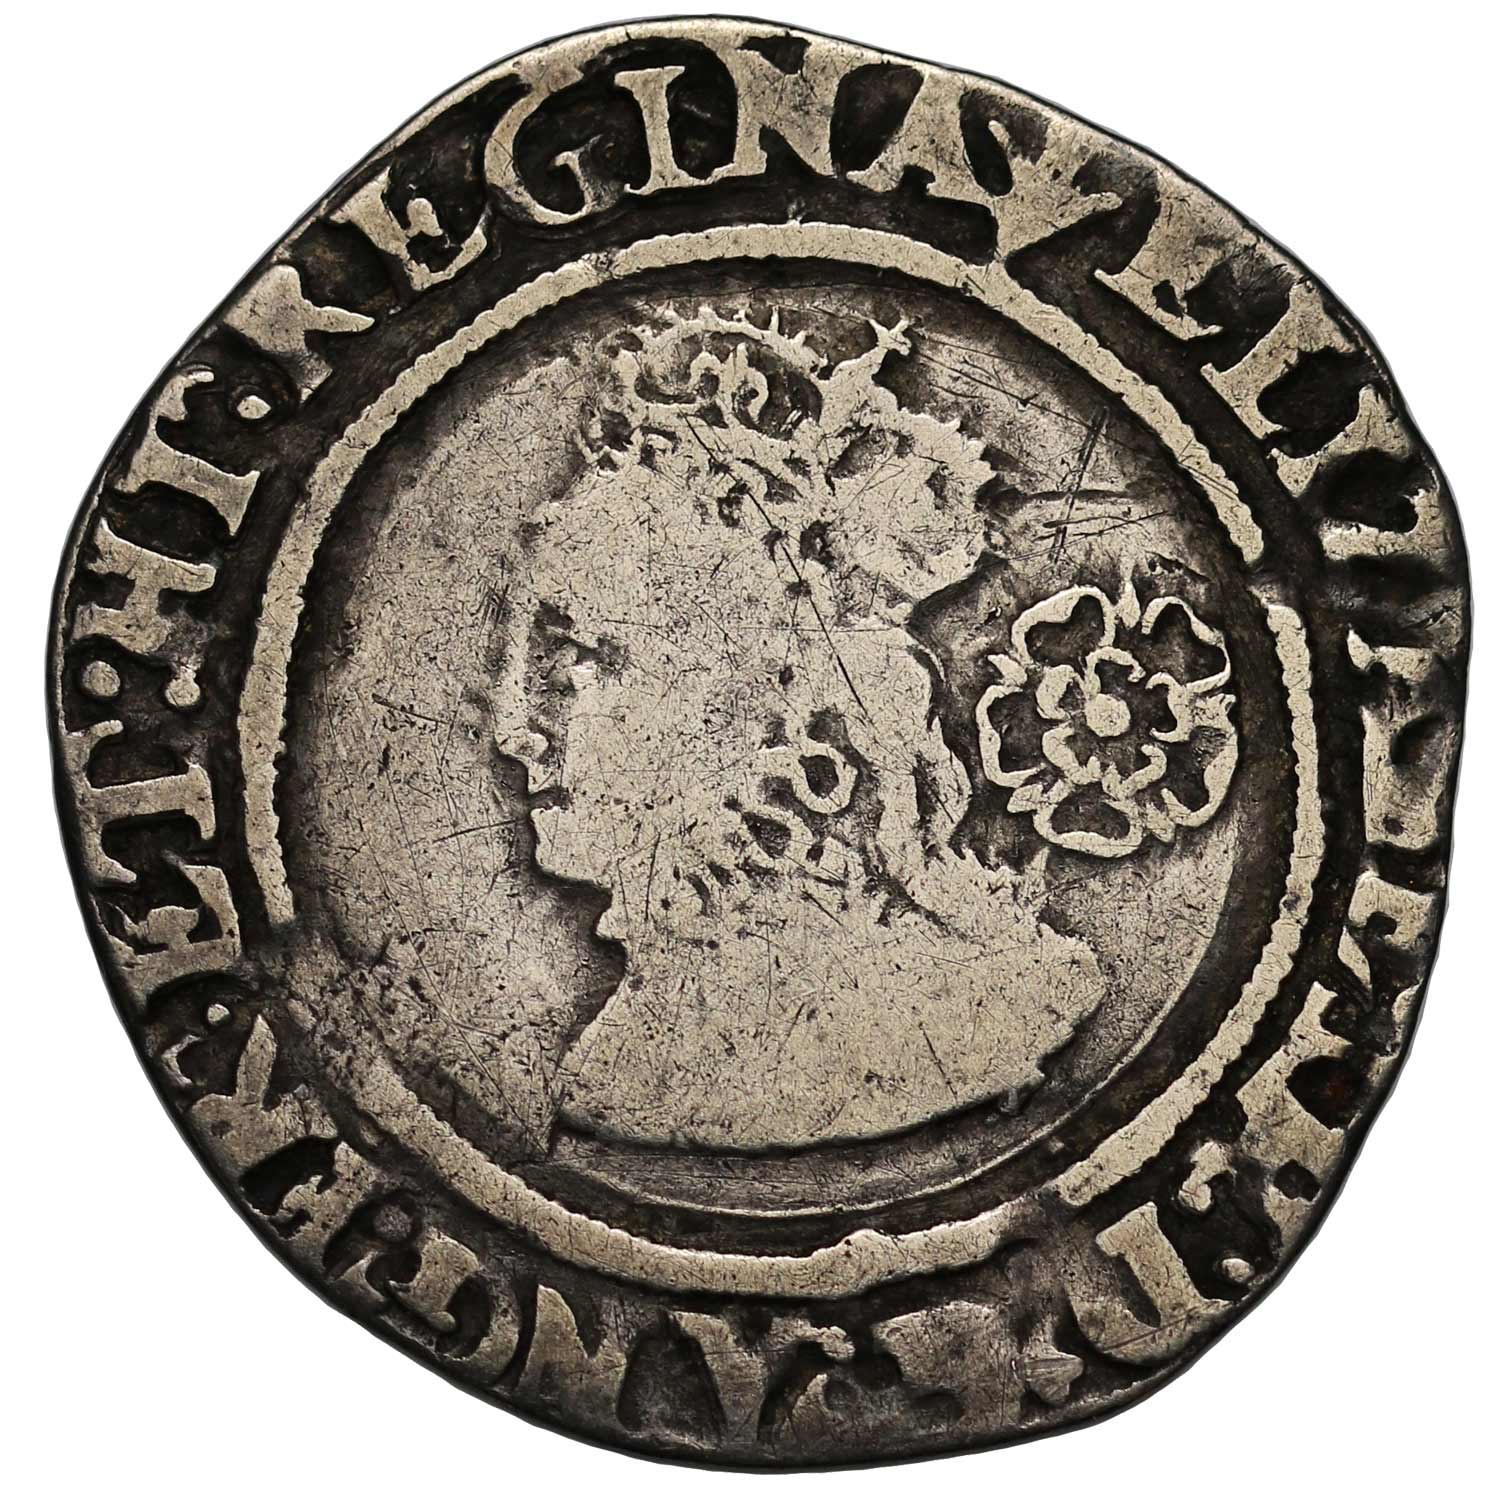 Genuine 1603 Elizabeth I Original Silver Sixpence Certificate of Authenticity and Presentation Box Included